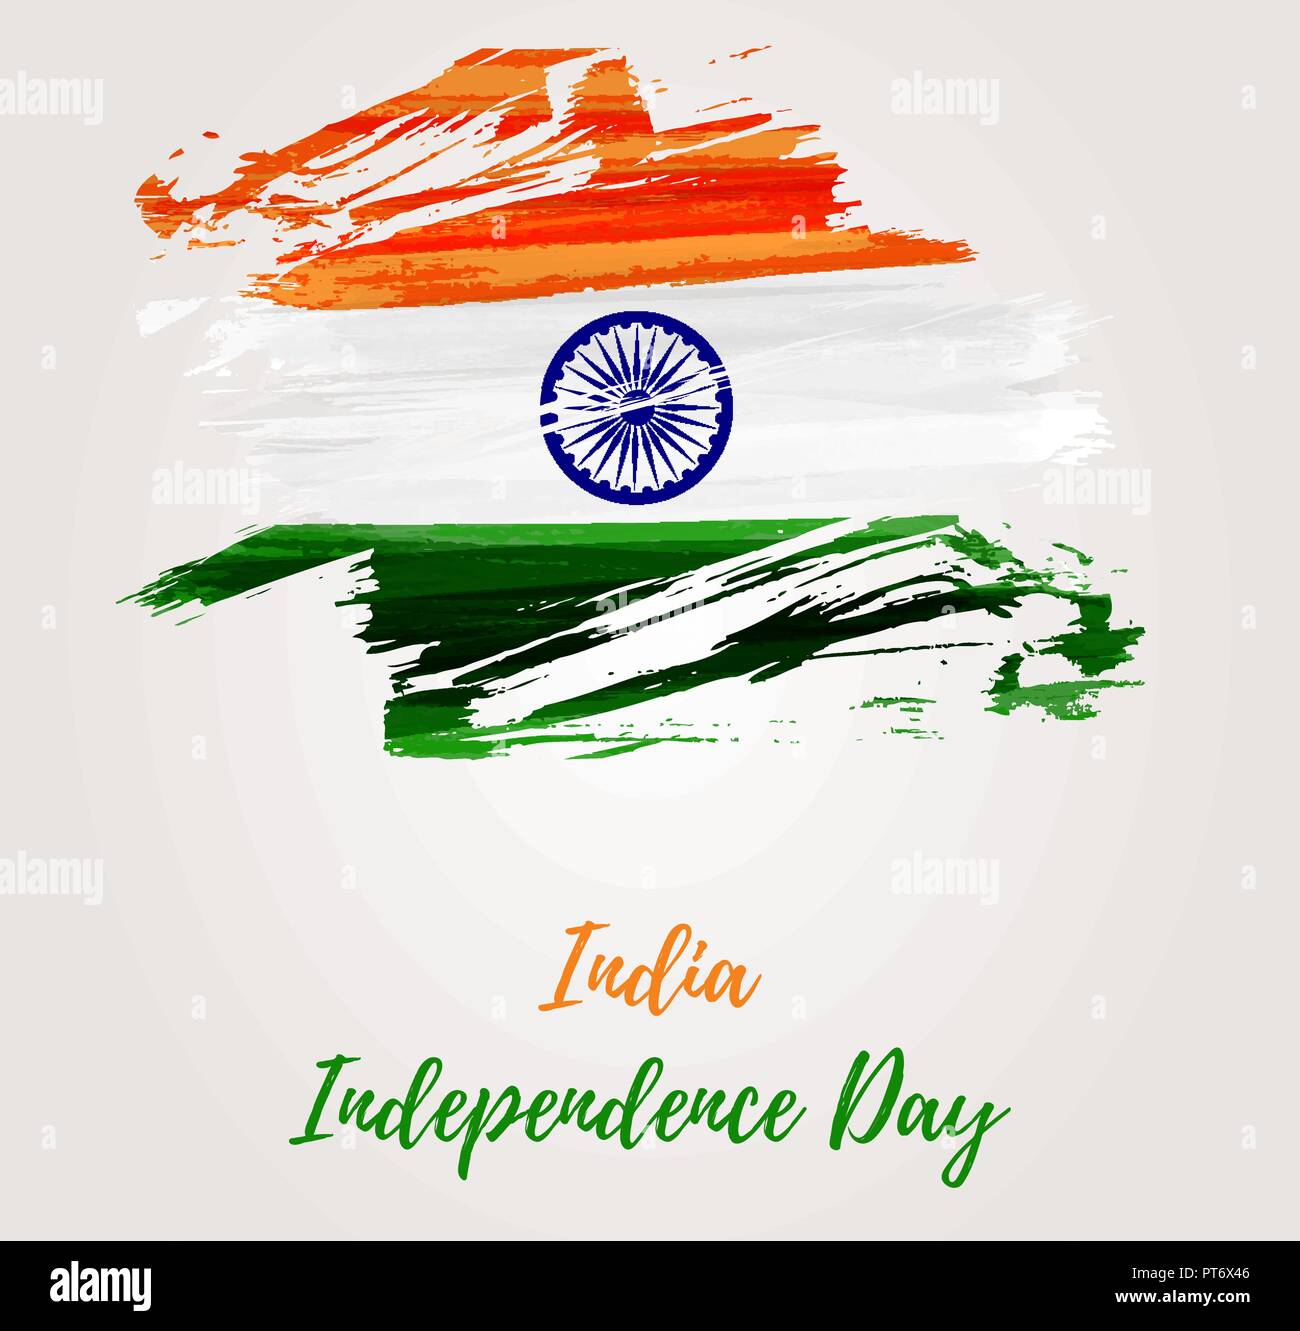 India Independence day background with abstract grunge watercolor flag. Concept for Independence day poster, flyer, banner, etc. Stock Vector